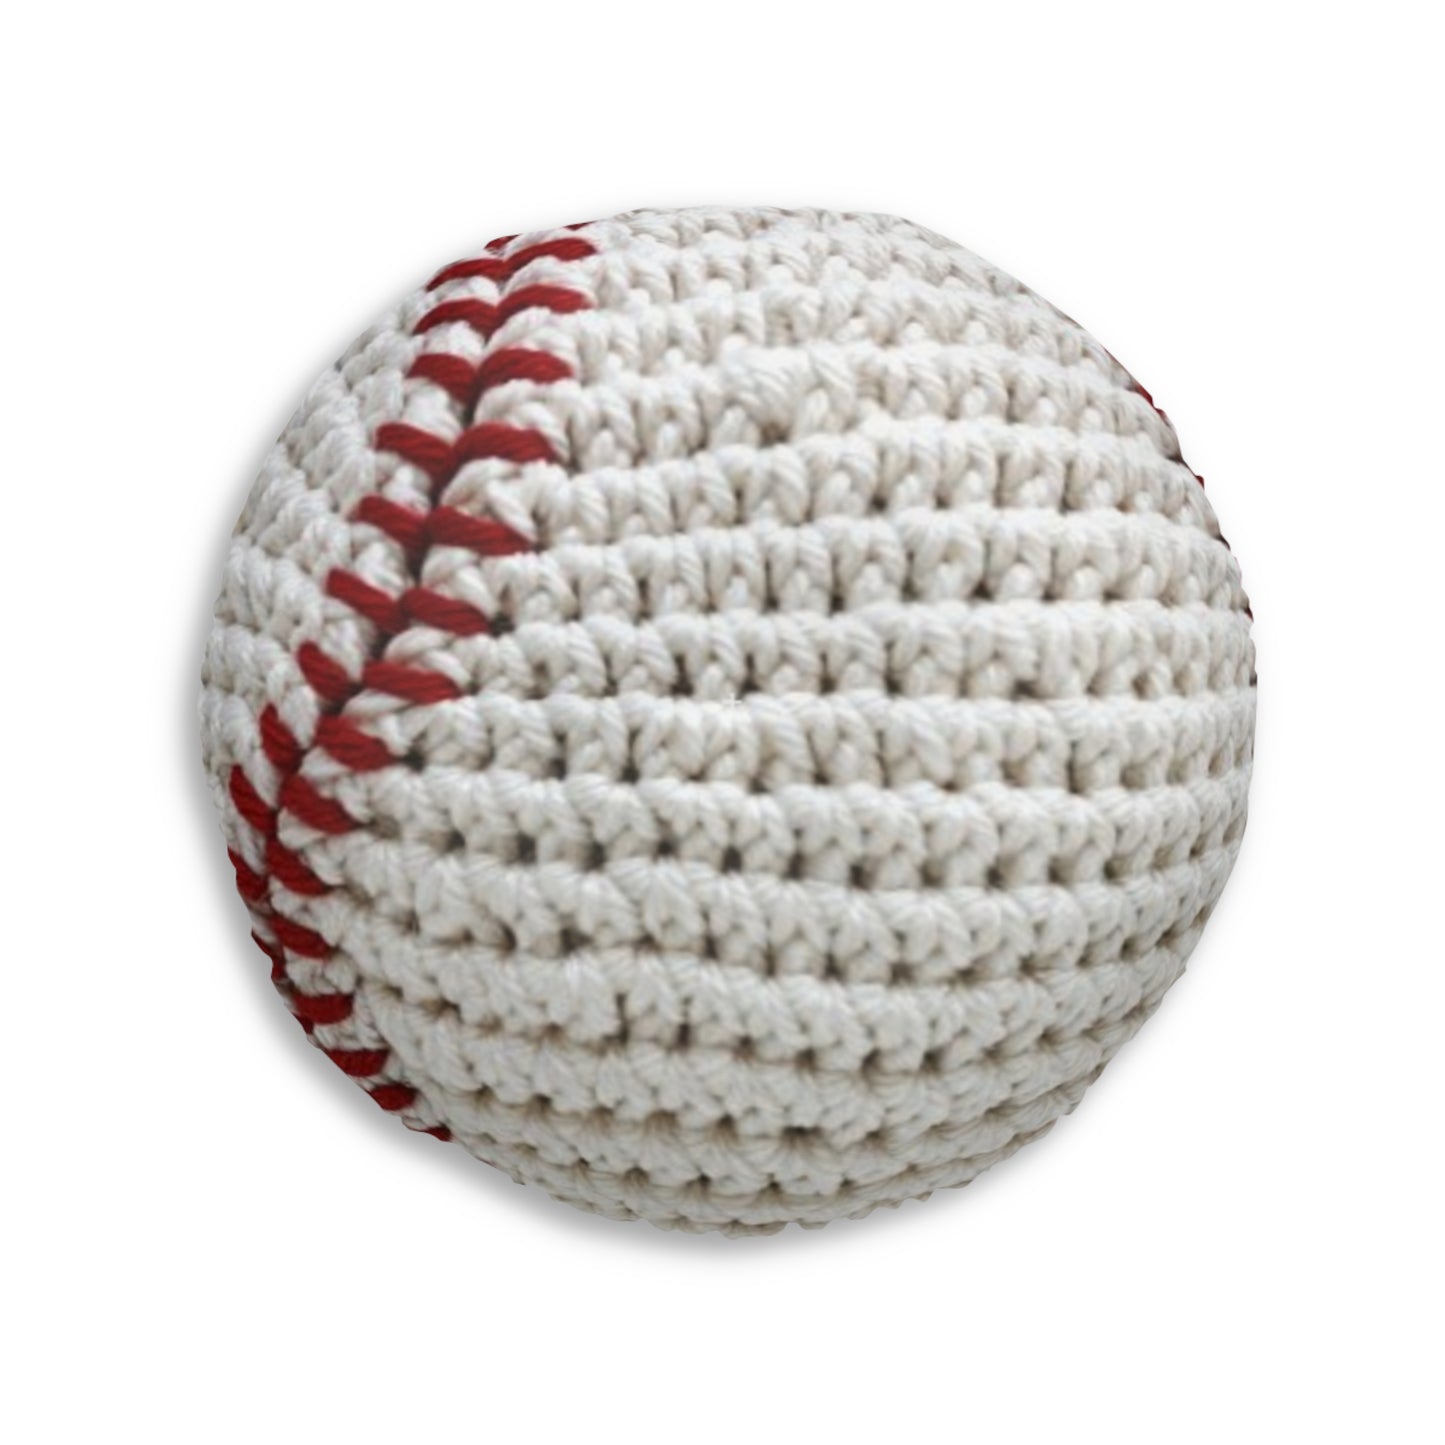 Home Baseball Shaped Hooked Pillow - Assembled and Shipped From USA - Tufted Floor Pillow, Round